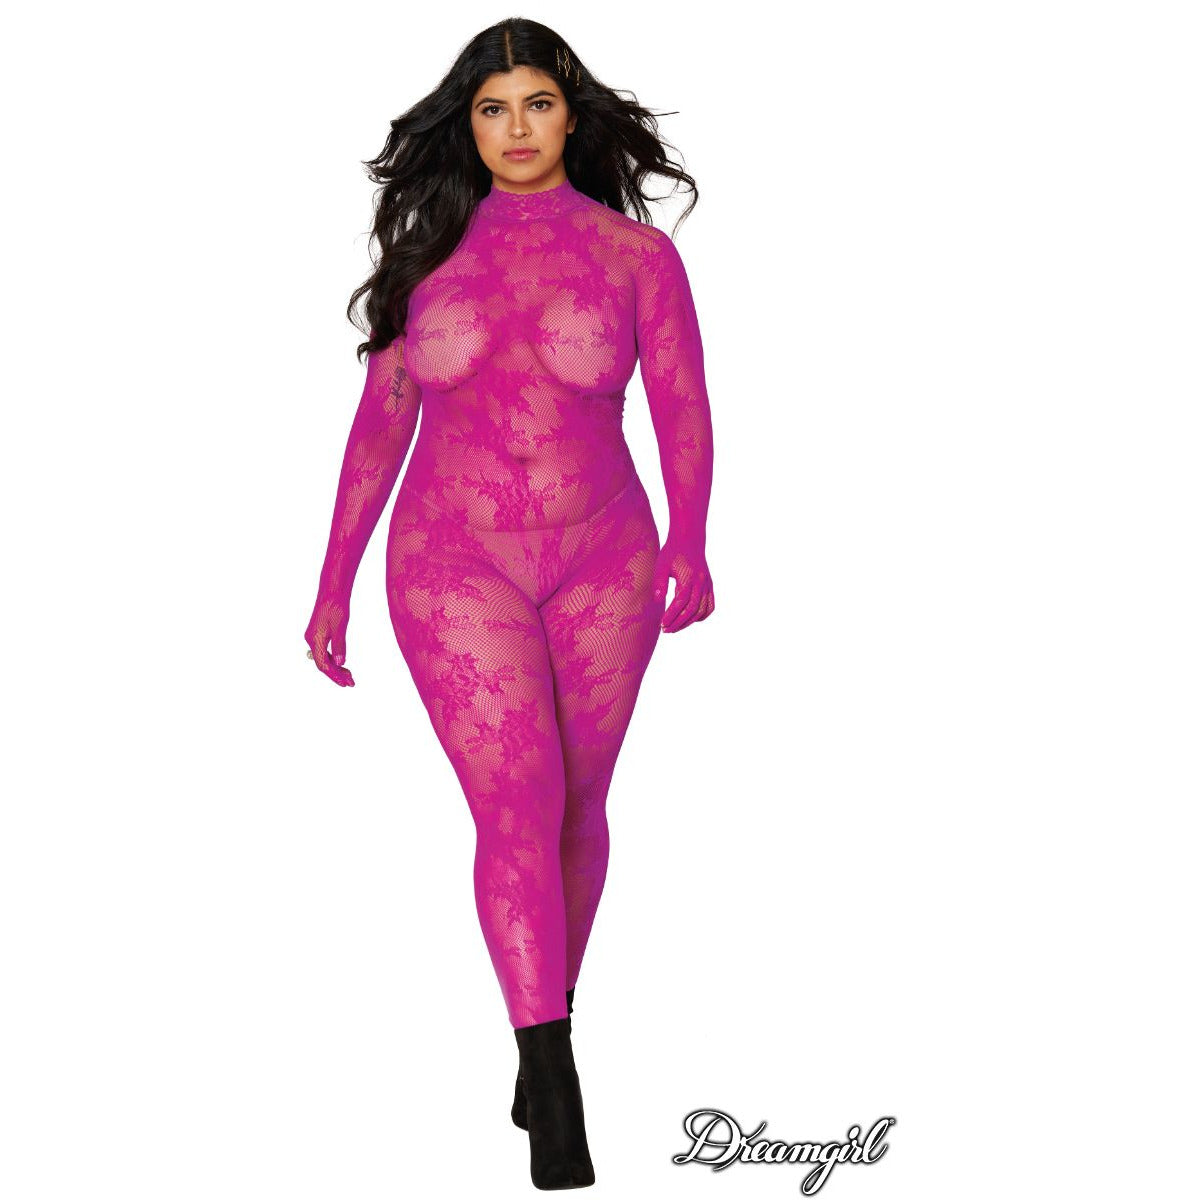 Full Lace Floral Catsuit by Dreamgirl